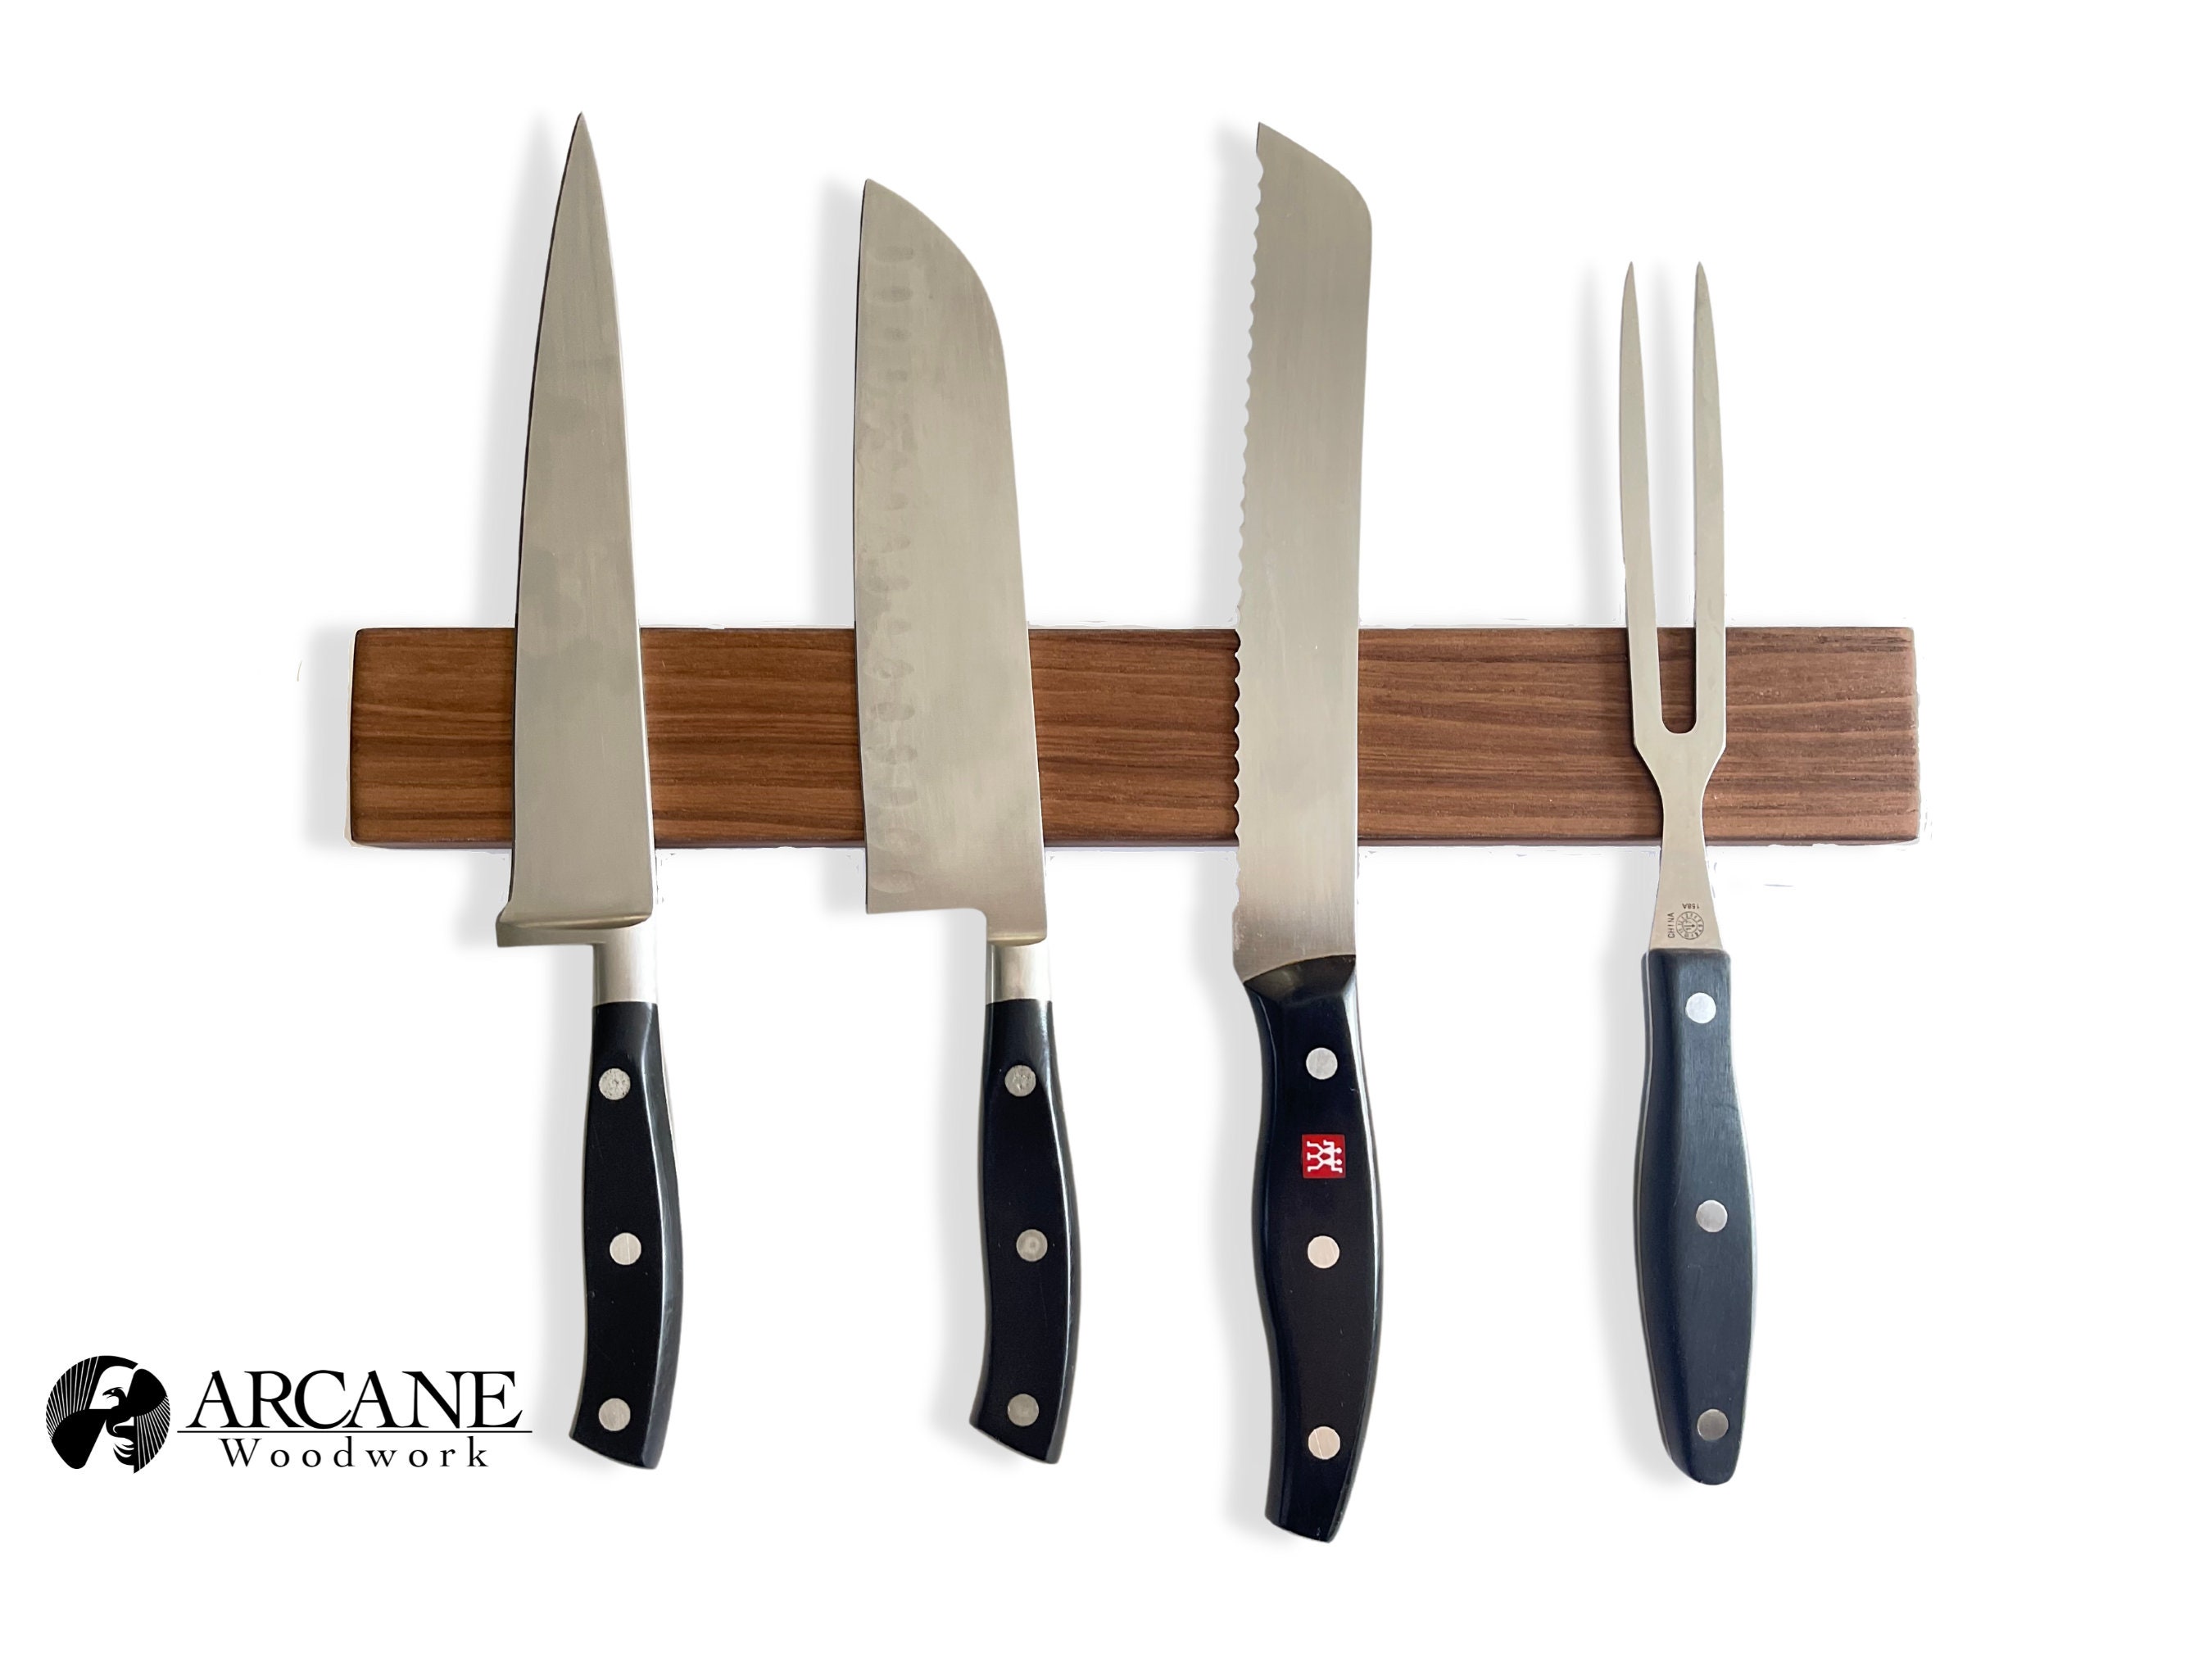 FINDKING Walnut Standable Kitchen Knife Protector Blade Guards